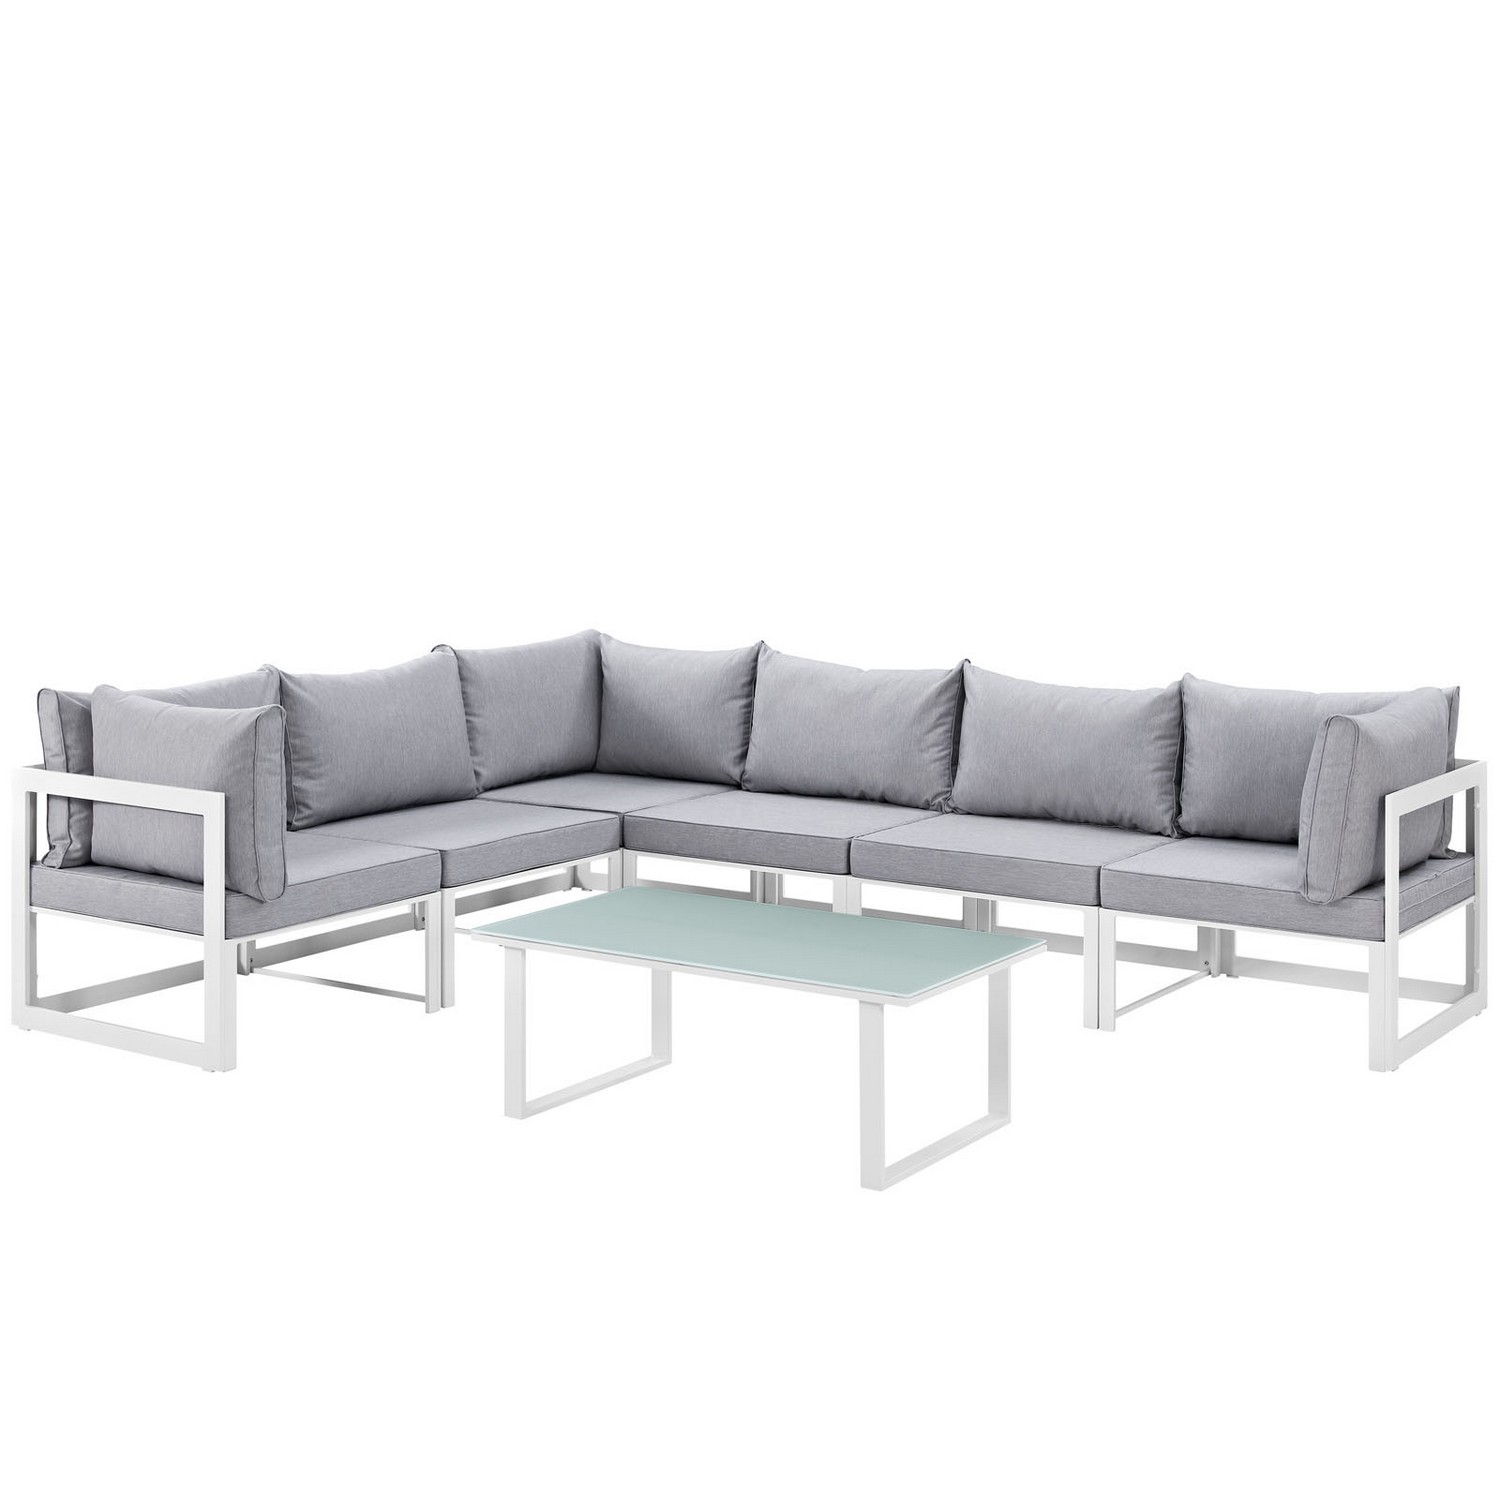 Modway Fortuna 7 Piece Outdoor Patio Sectional Sofa Set - White/Gray